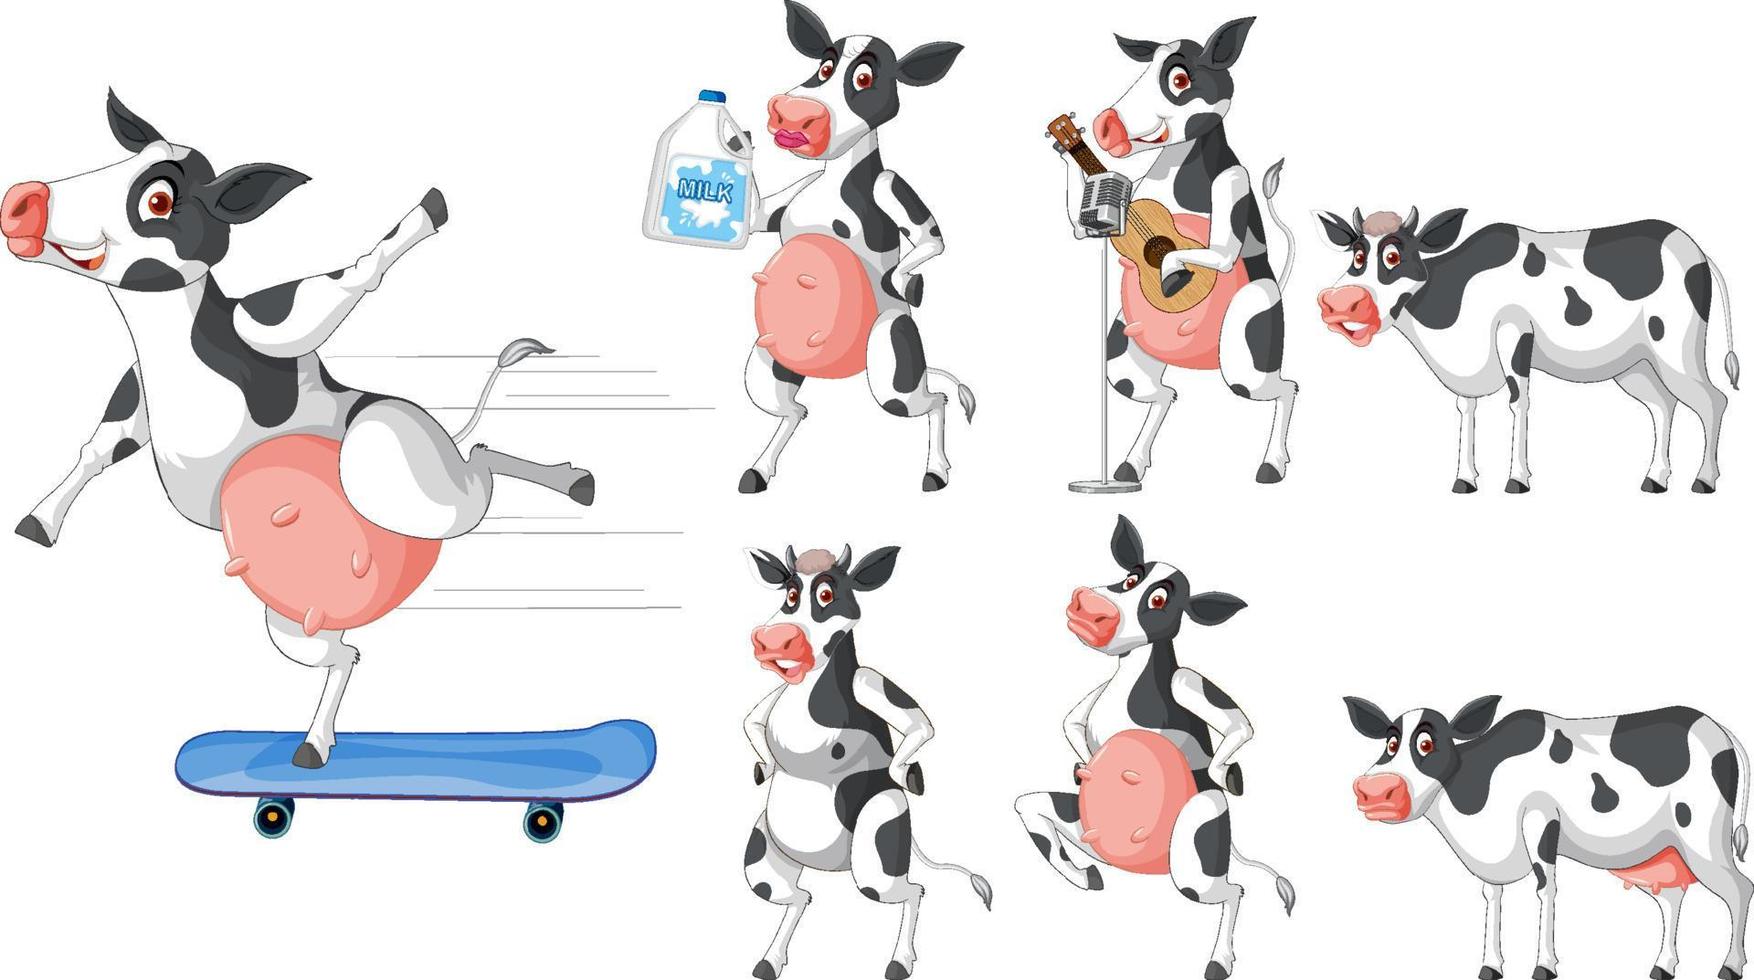 Set of different milk cows in cartoon style vector